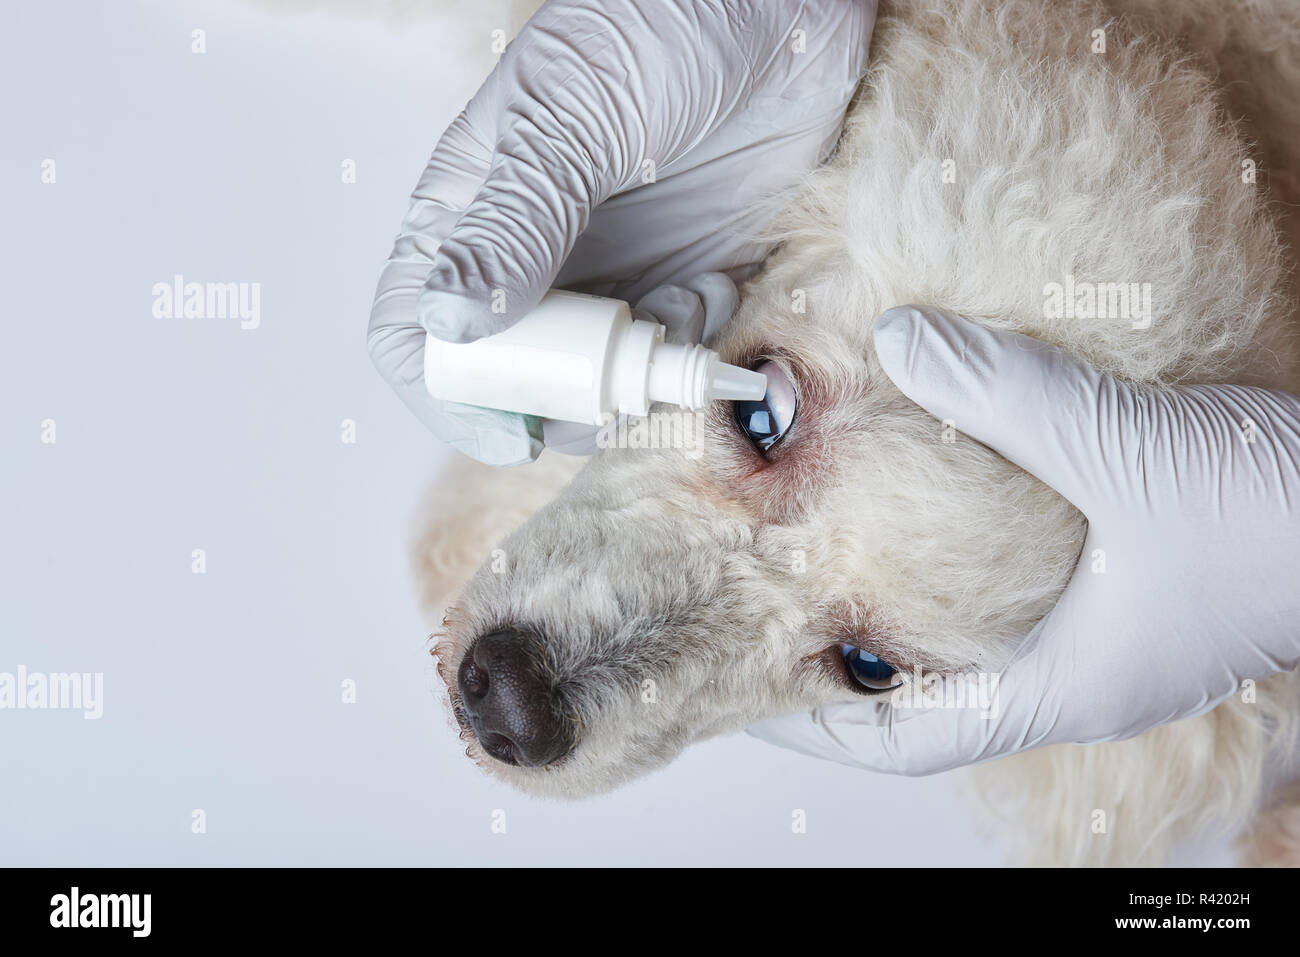 how to put eye drops in a dog that bites